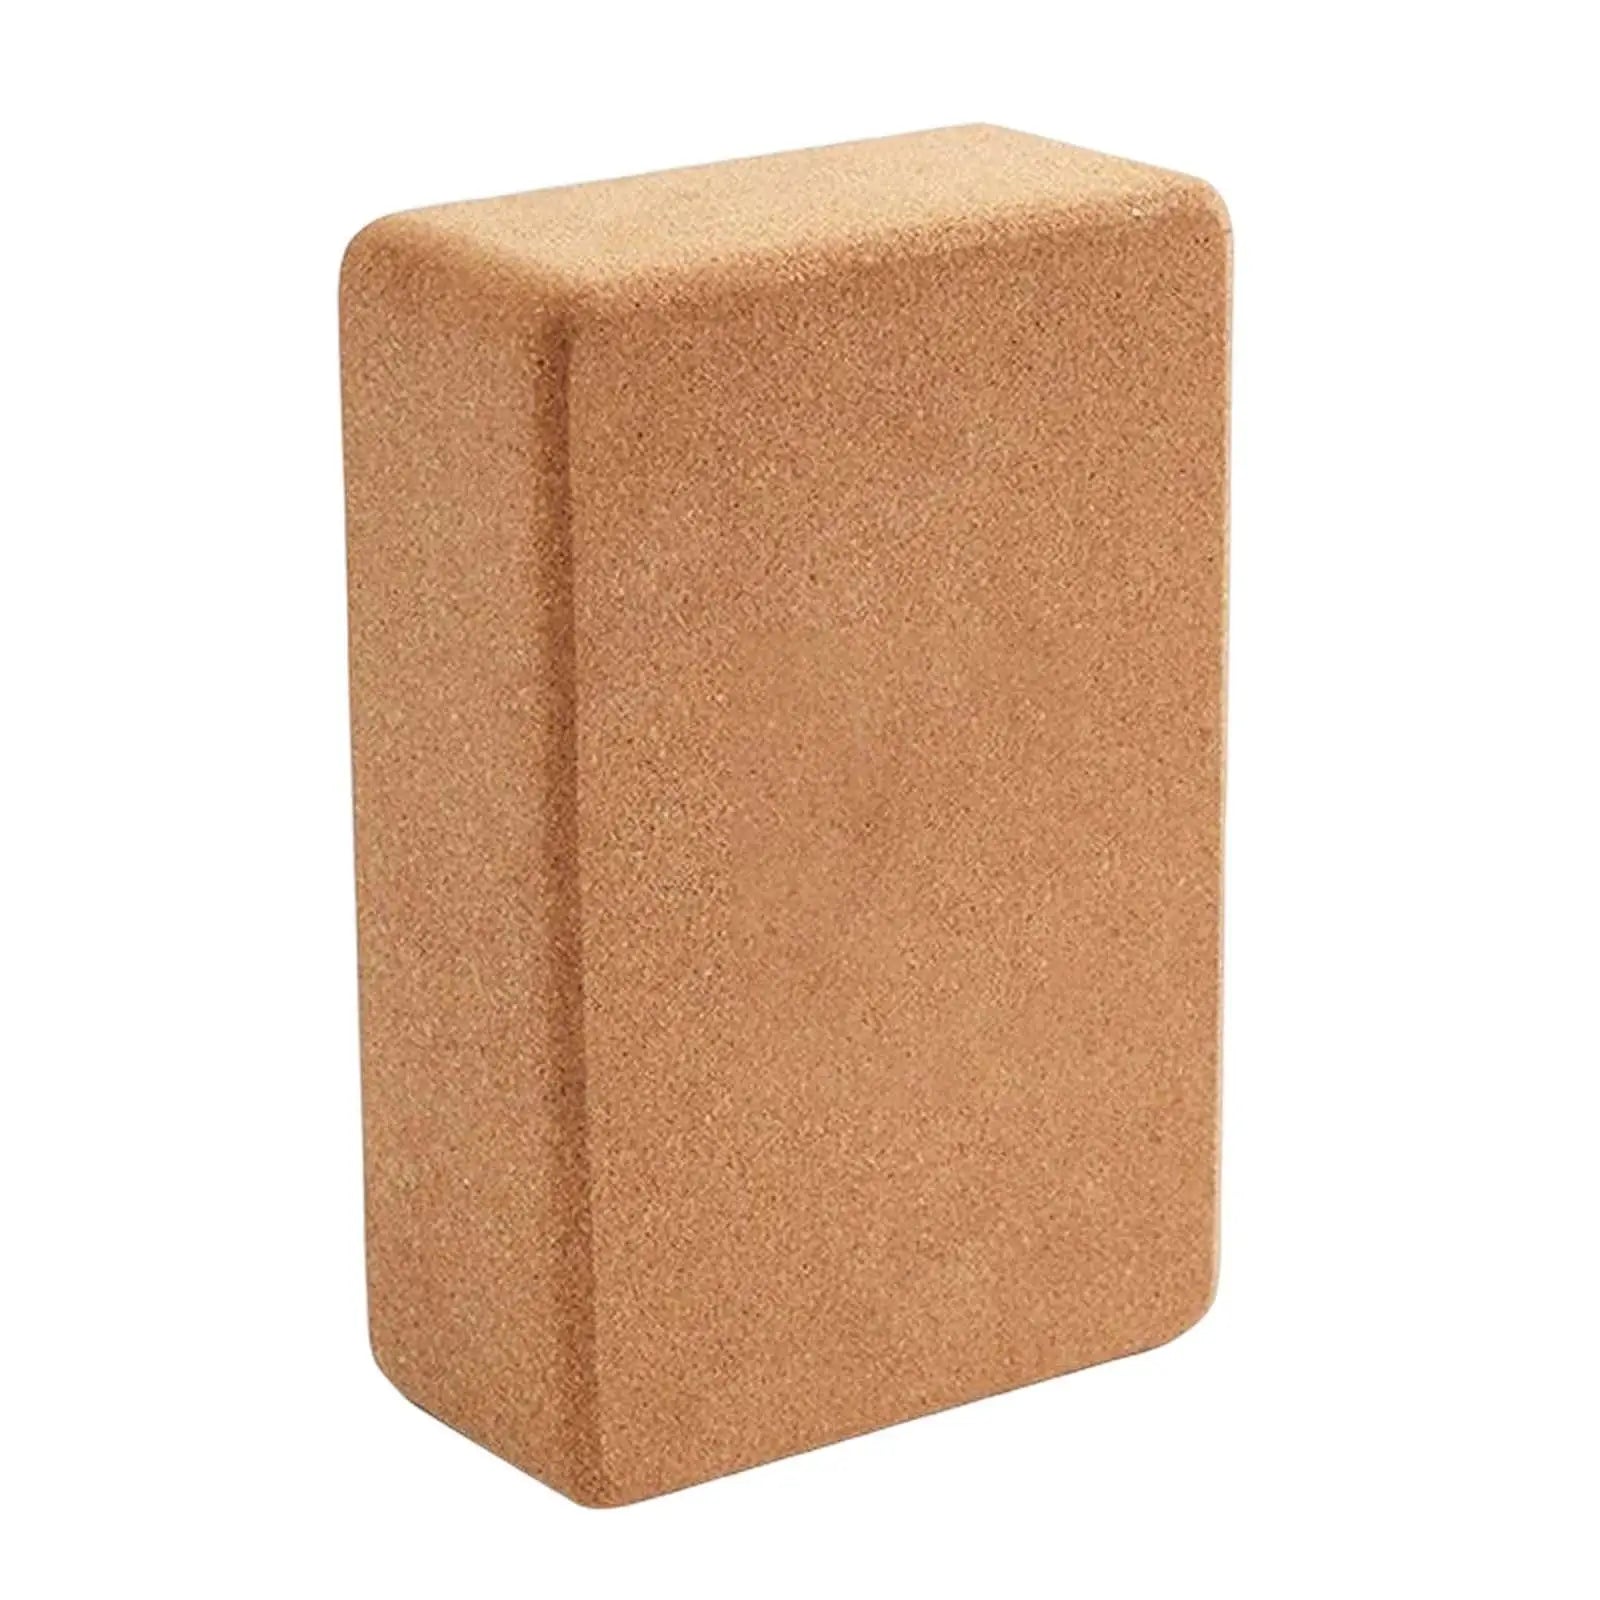 Basic picture of cork block